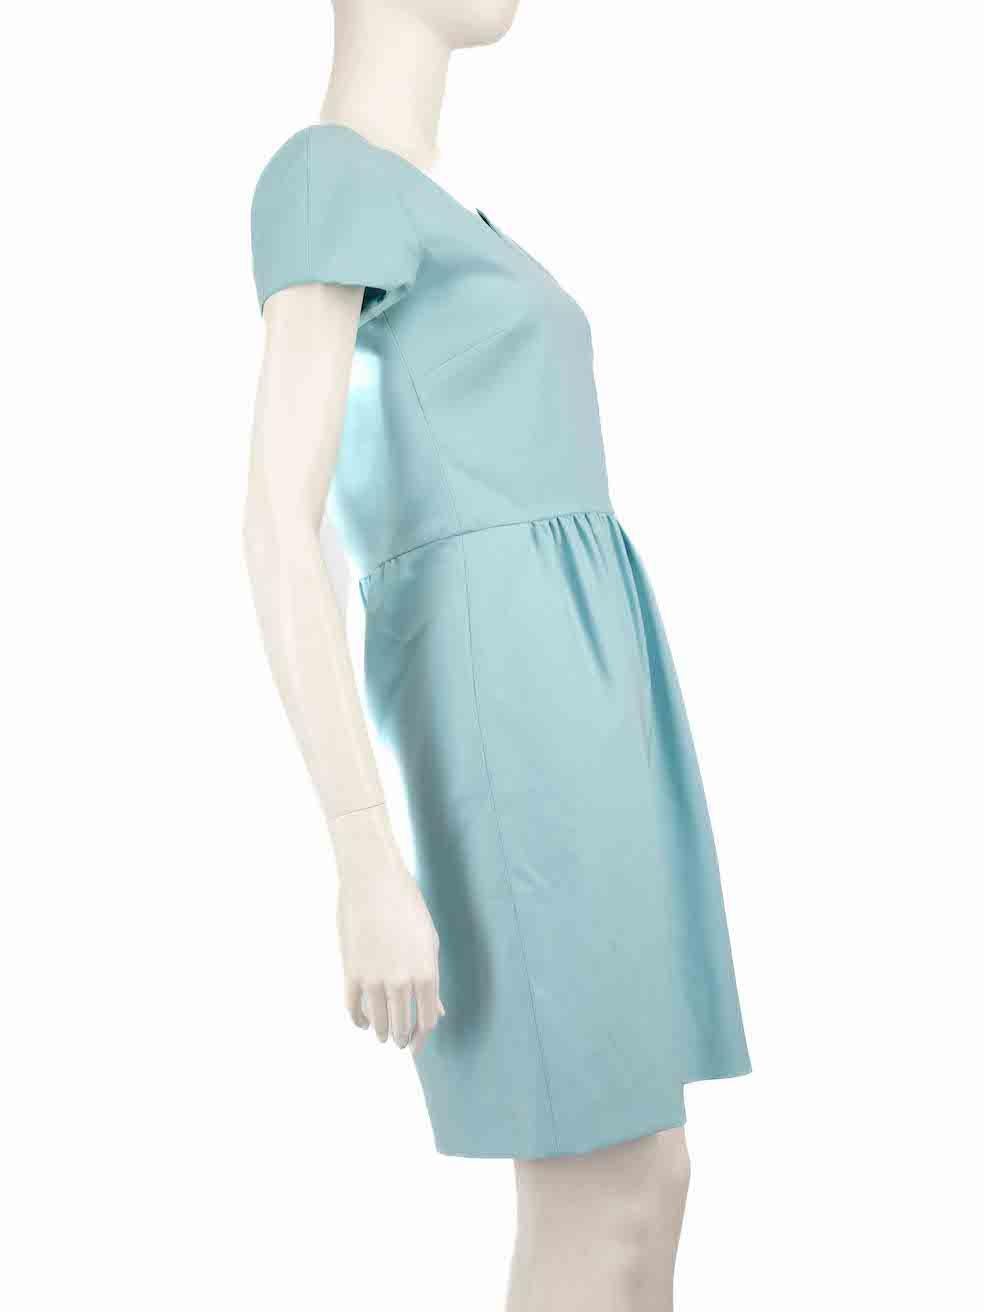 CONDITION is Very good. Minimal wear to the dress is evident. Minimal wear to the right sleeve and top back and the bottom is seen with discolouration marks on this used Boutique Moschino designer resale item.
 
 
 
 Details
 
 
 Blue
 
 Polyester
